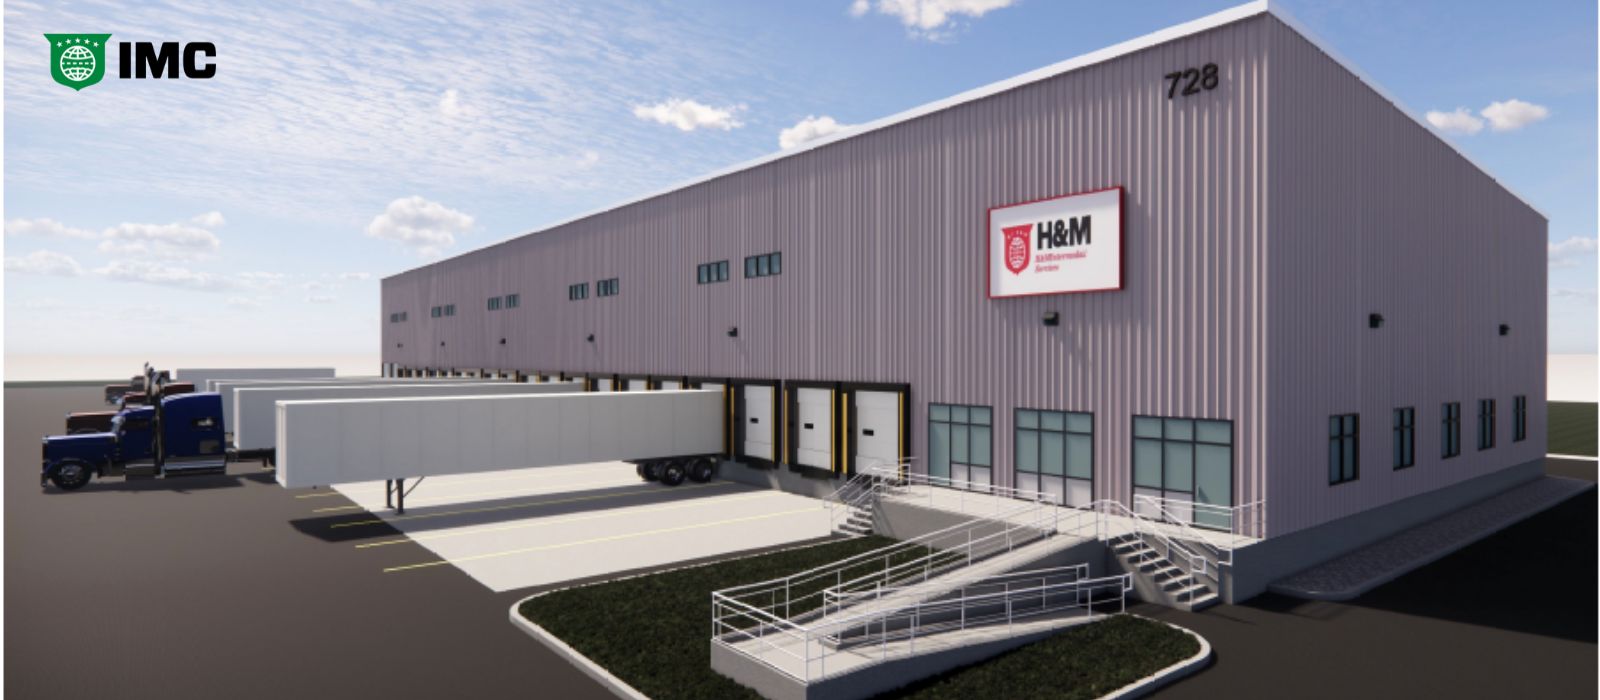 IMC and H&M Intermodal Expands with New Container Depot in Newark